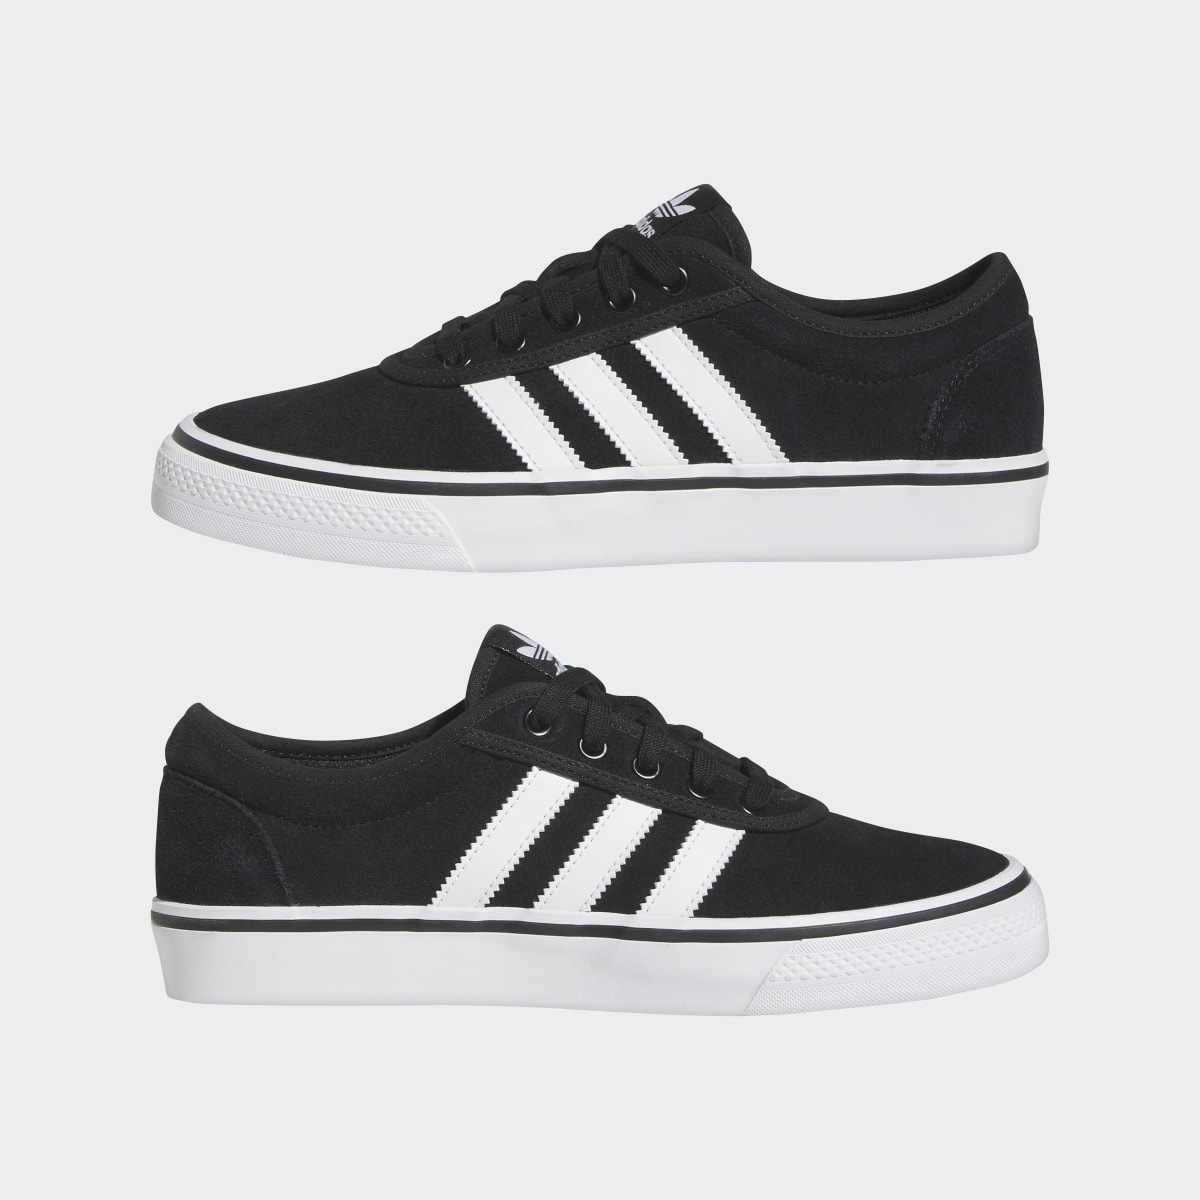 Adidas Adiease Shoes. 8